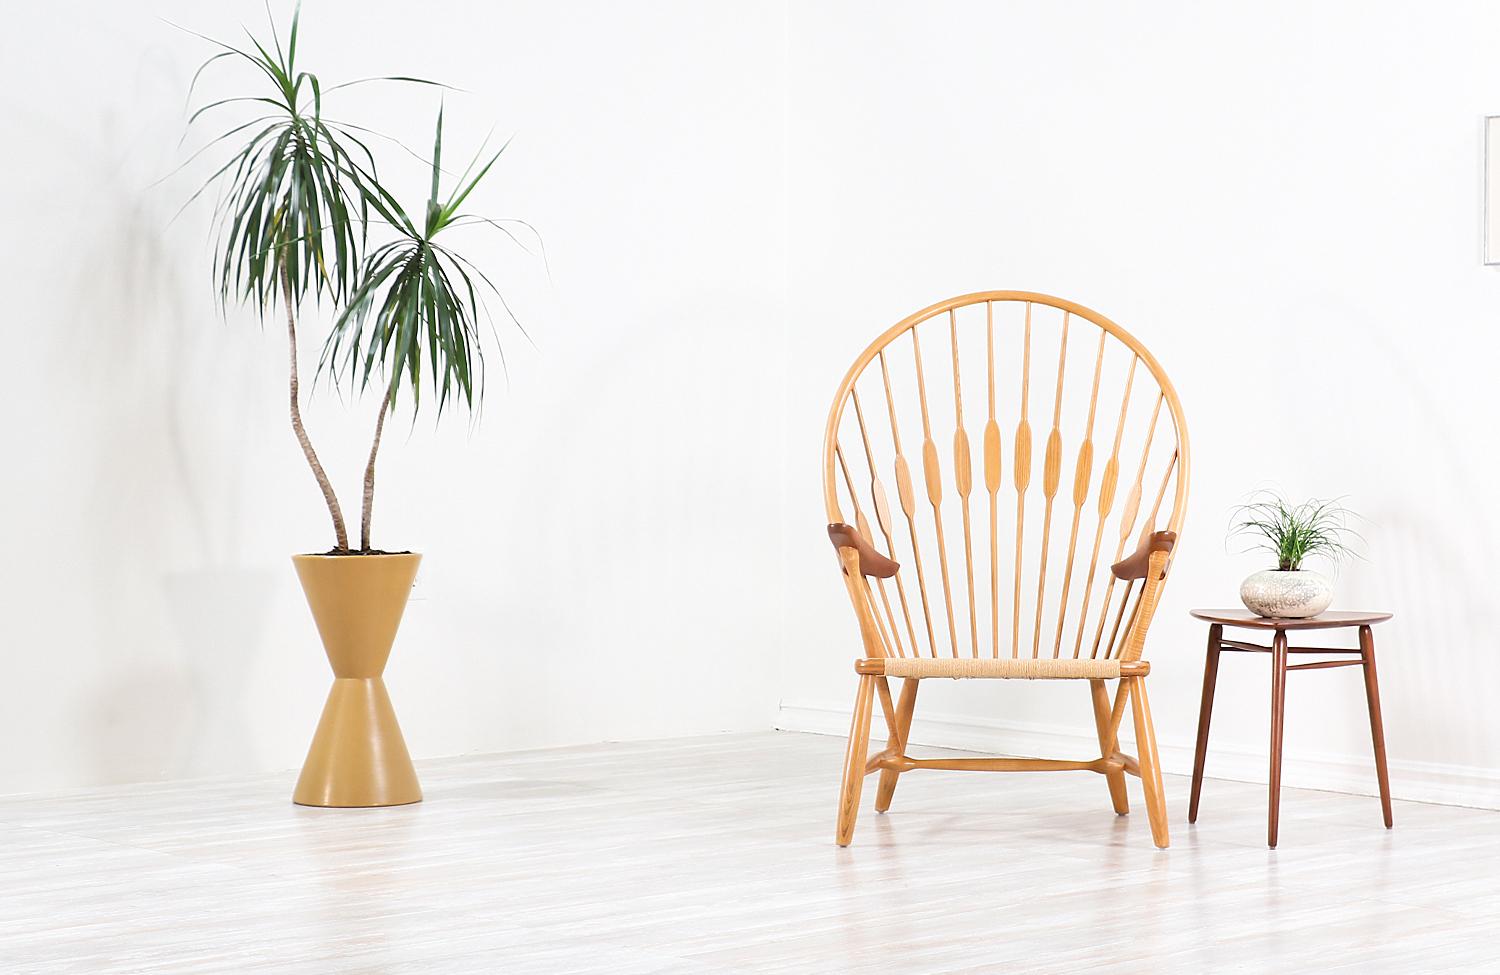 Iconic ‘Peacock’ chair model JH-550 designed by architect and designer Hans J. Wegner in 1947 and produced by cabinet maker Johannes Hansen in Denmark. Inspired by a traditional English Windsor chair, the peacock chair is one of Wegner’s finest